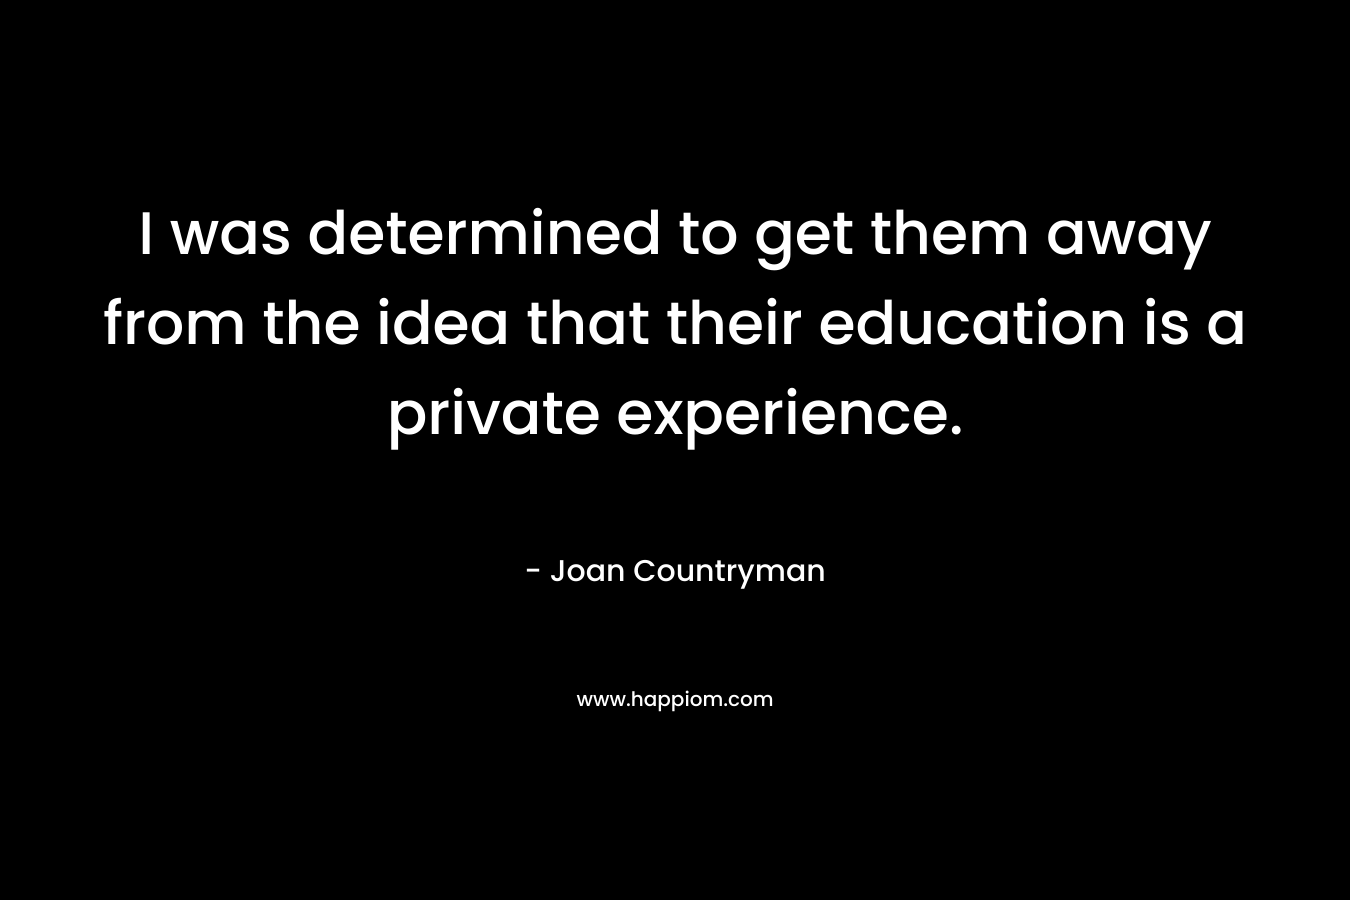 I was determined to get them away from the idea that their education is a private experience.